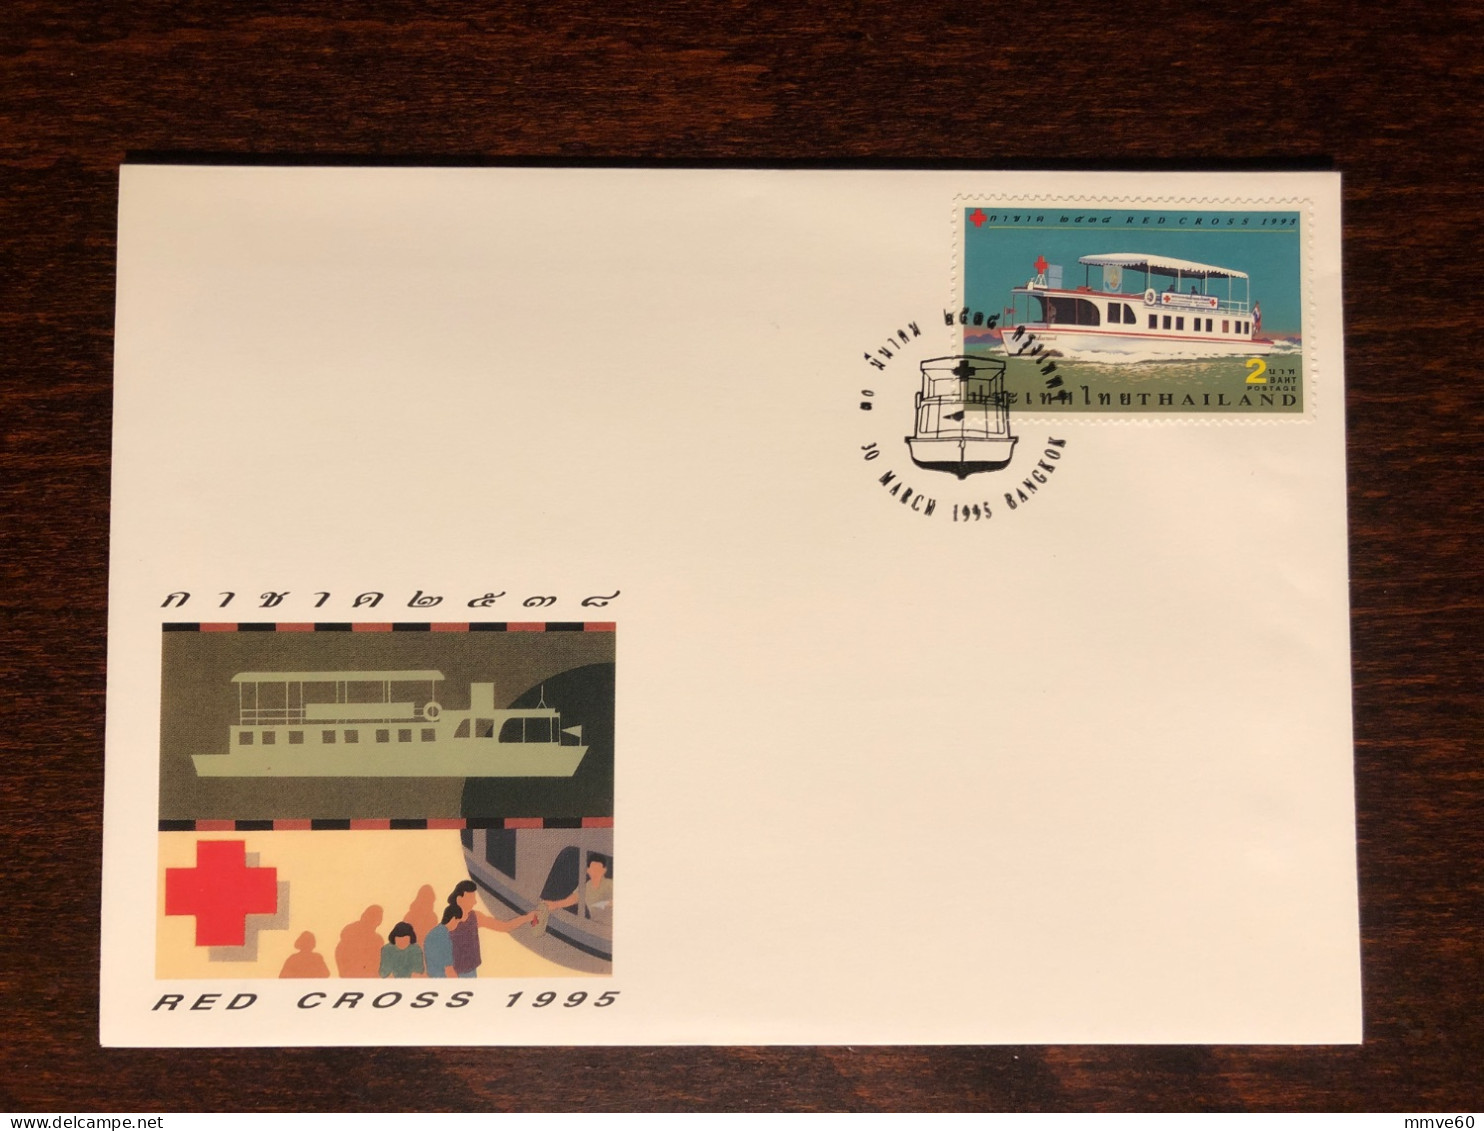 THAILAND FDC COVER 1995 YEAR RED CROSS HEALTH MEDICINE STAMPS - Thaïlande